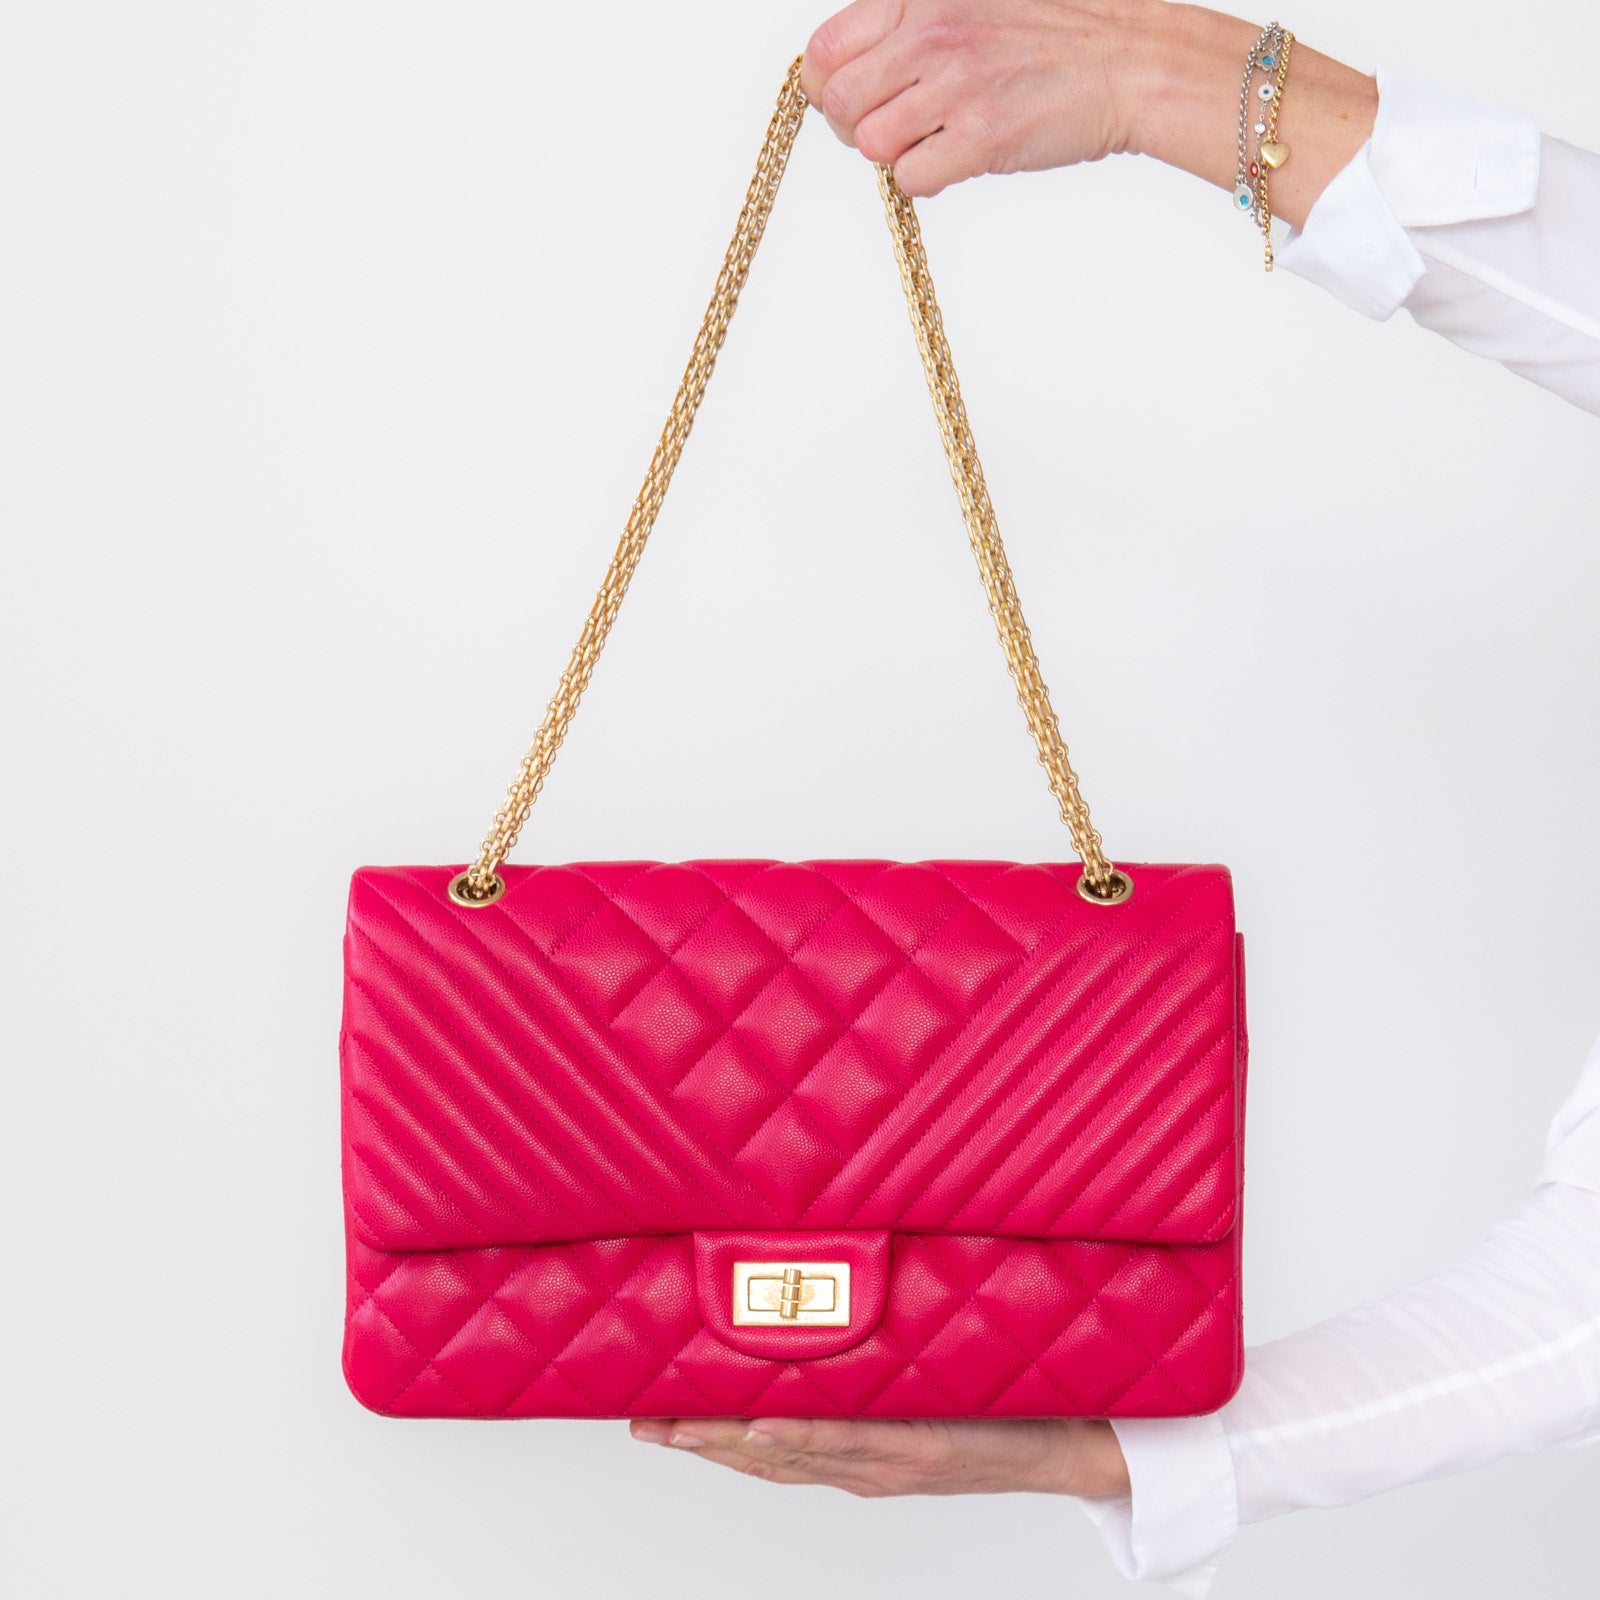 Chanel Chevron Quilted Pink Large Reissue 2.55 Double Flap Bag - Image 3 of 11